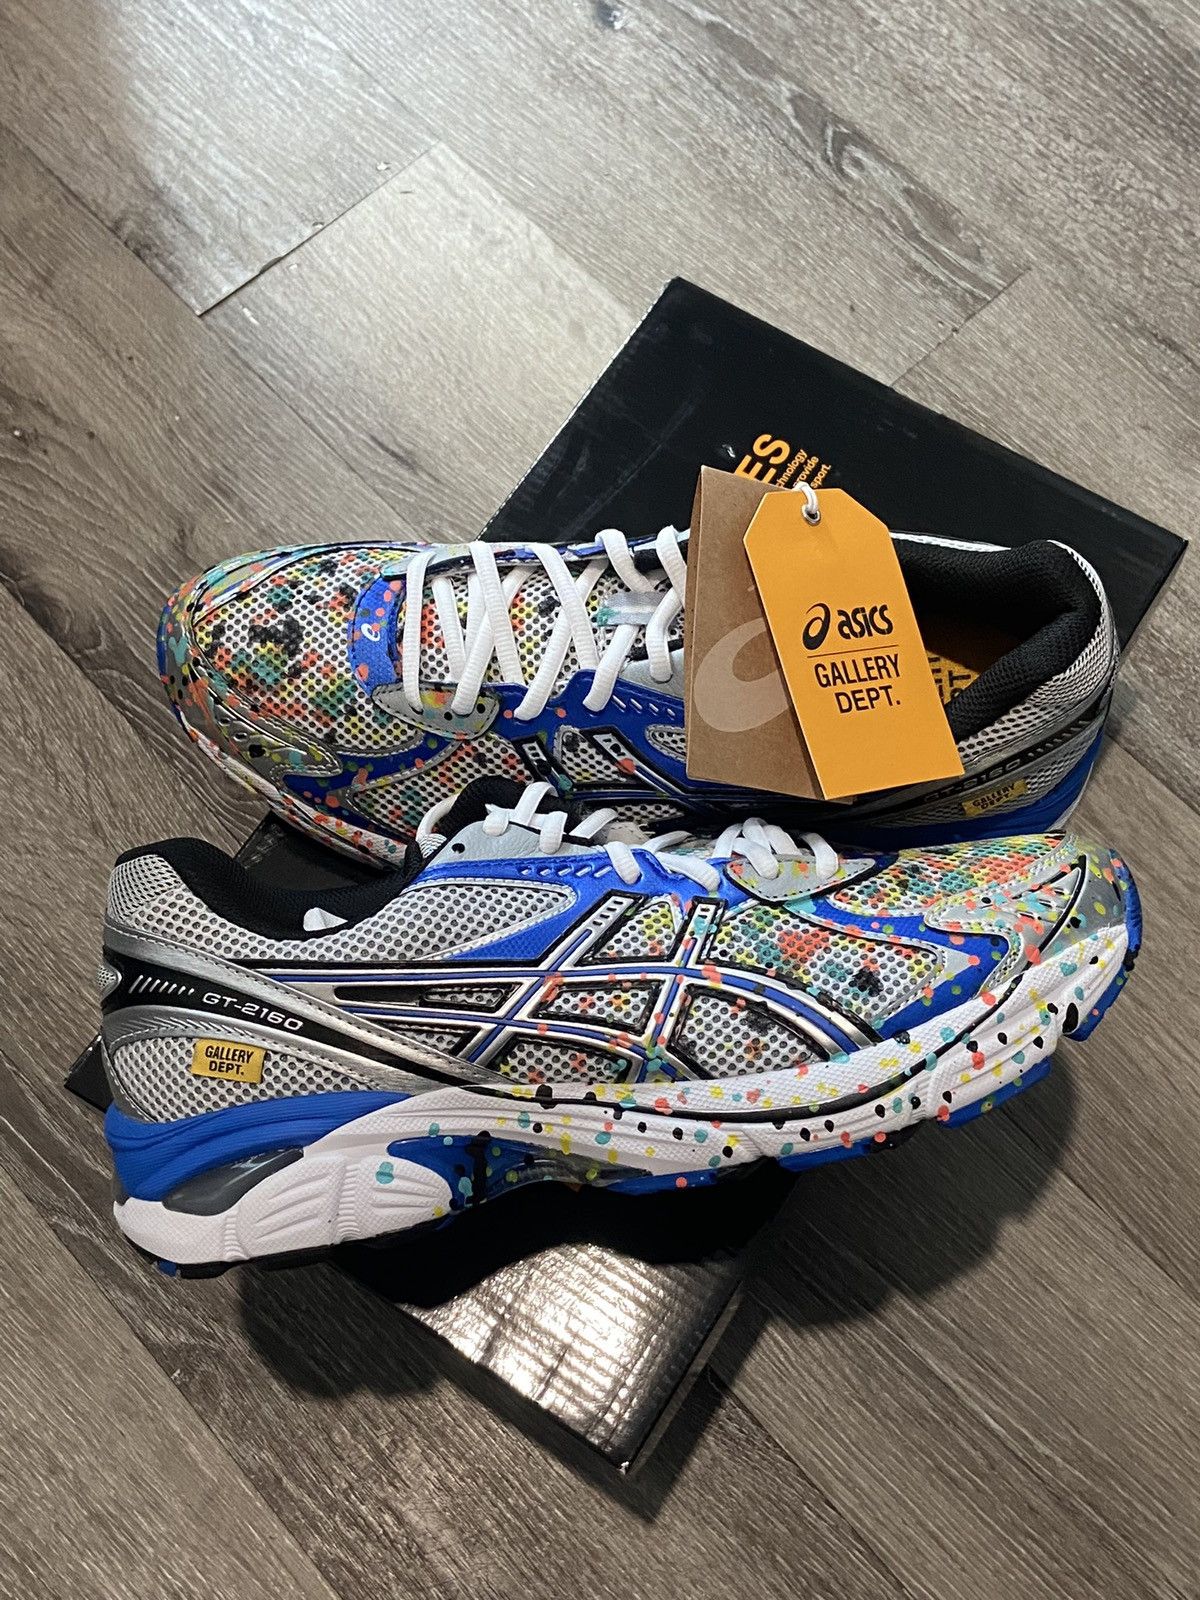 ASICS GT 2160 GALLERY DEPT. COMPLEXCON EXCLUSIVE SIZE 7.5 Brand